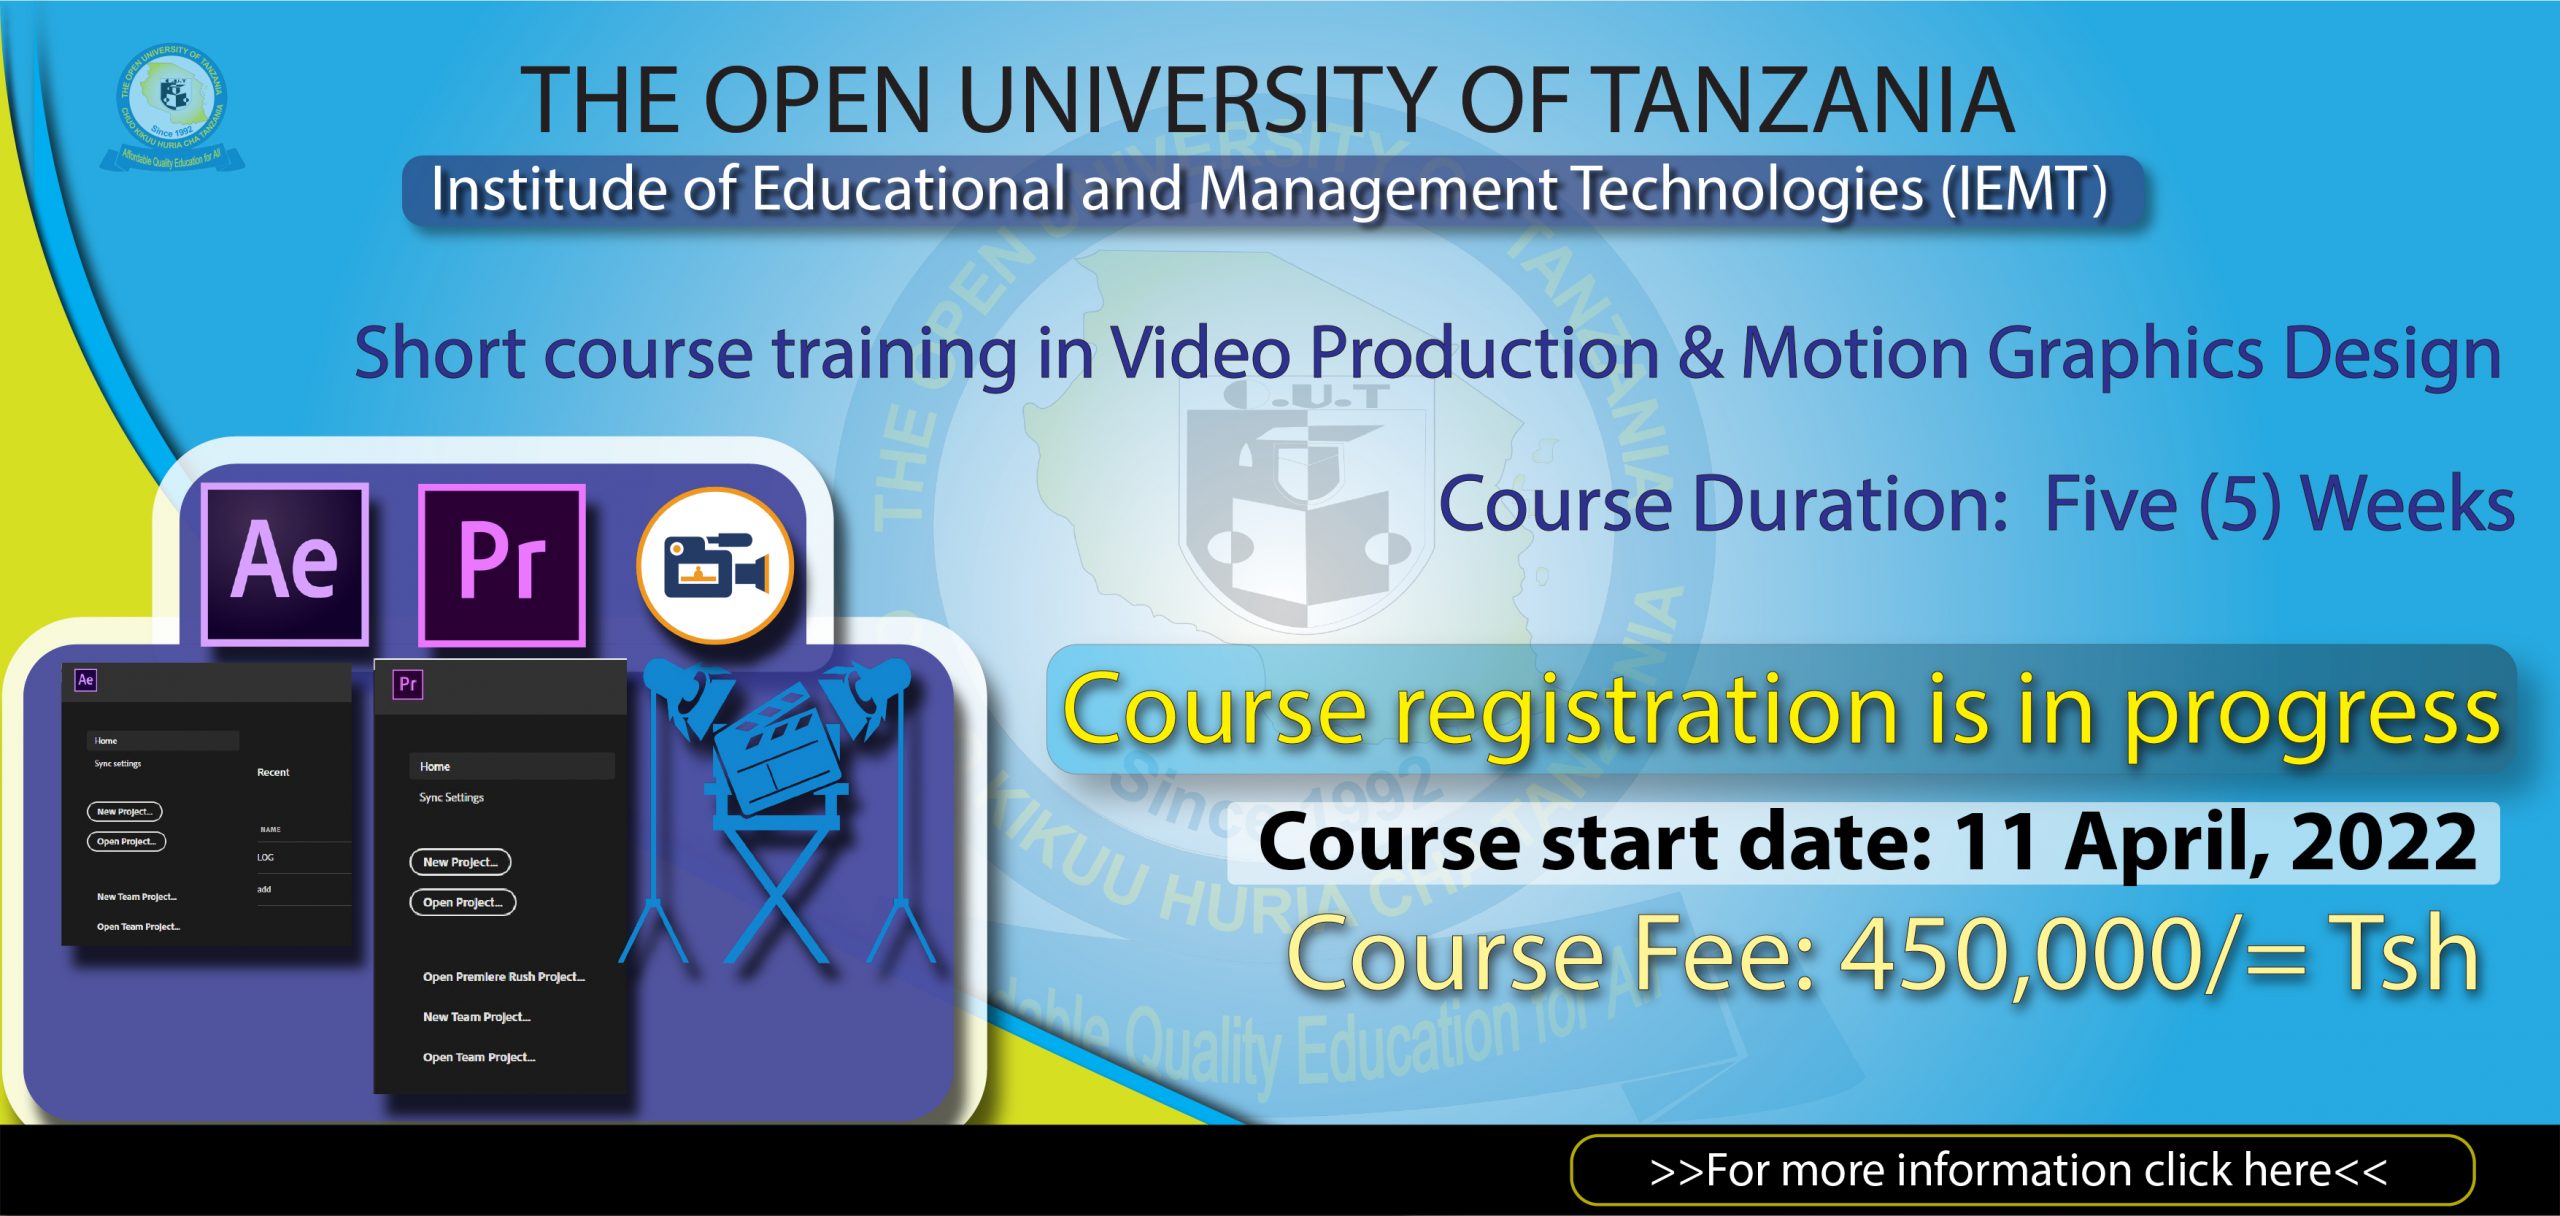 Short Course training in Video Production & Motion Graphics Design